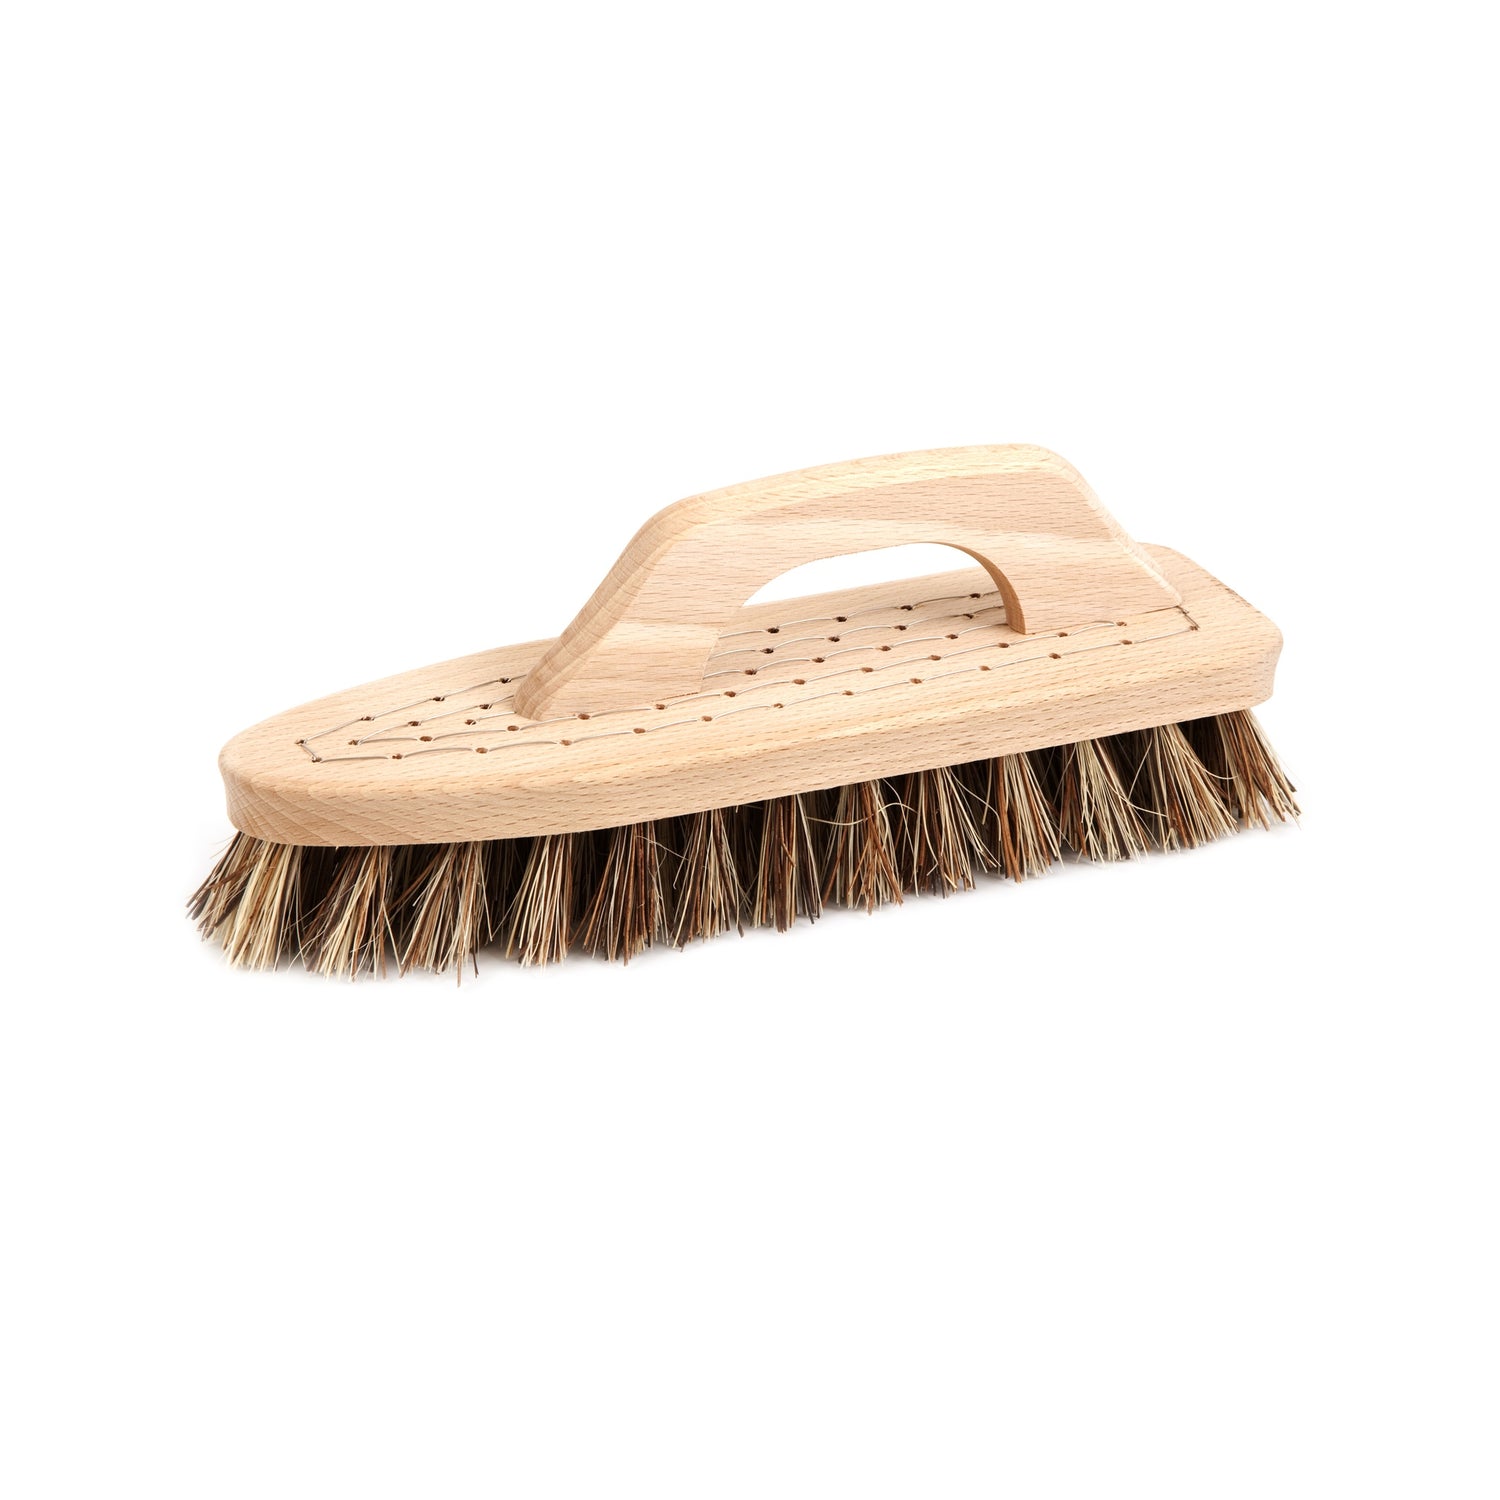 Scrubbing Brush With A Handle